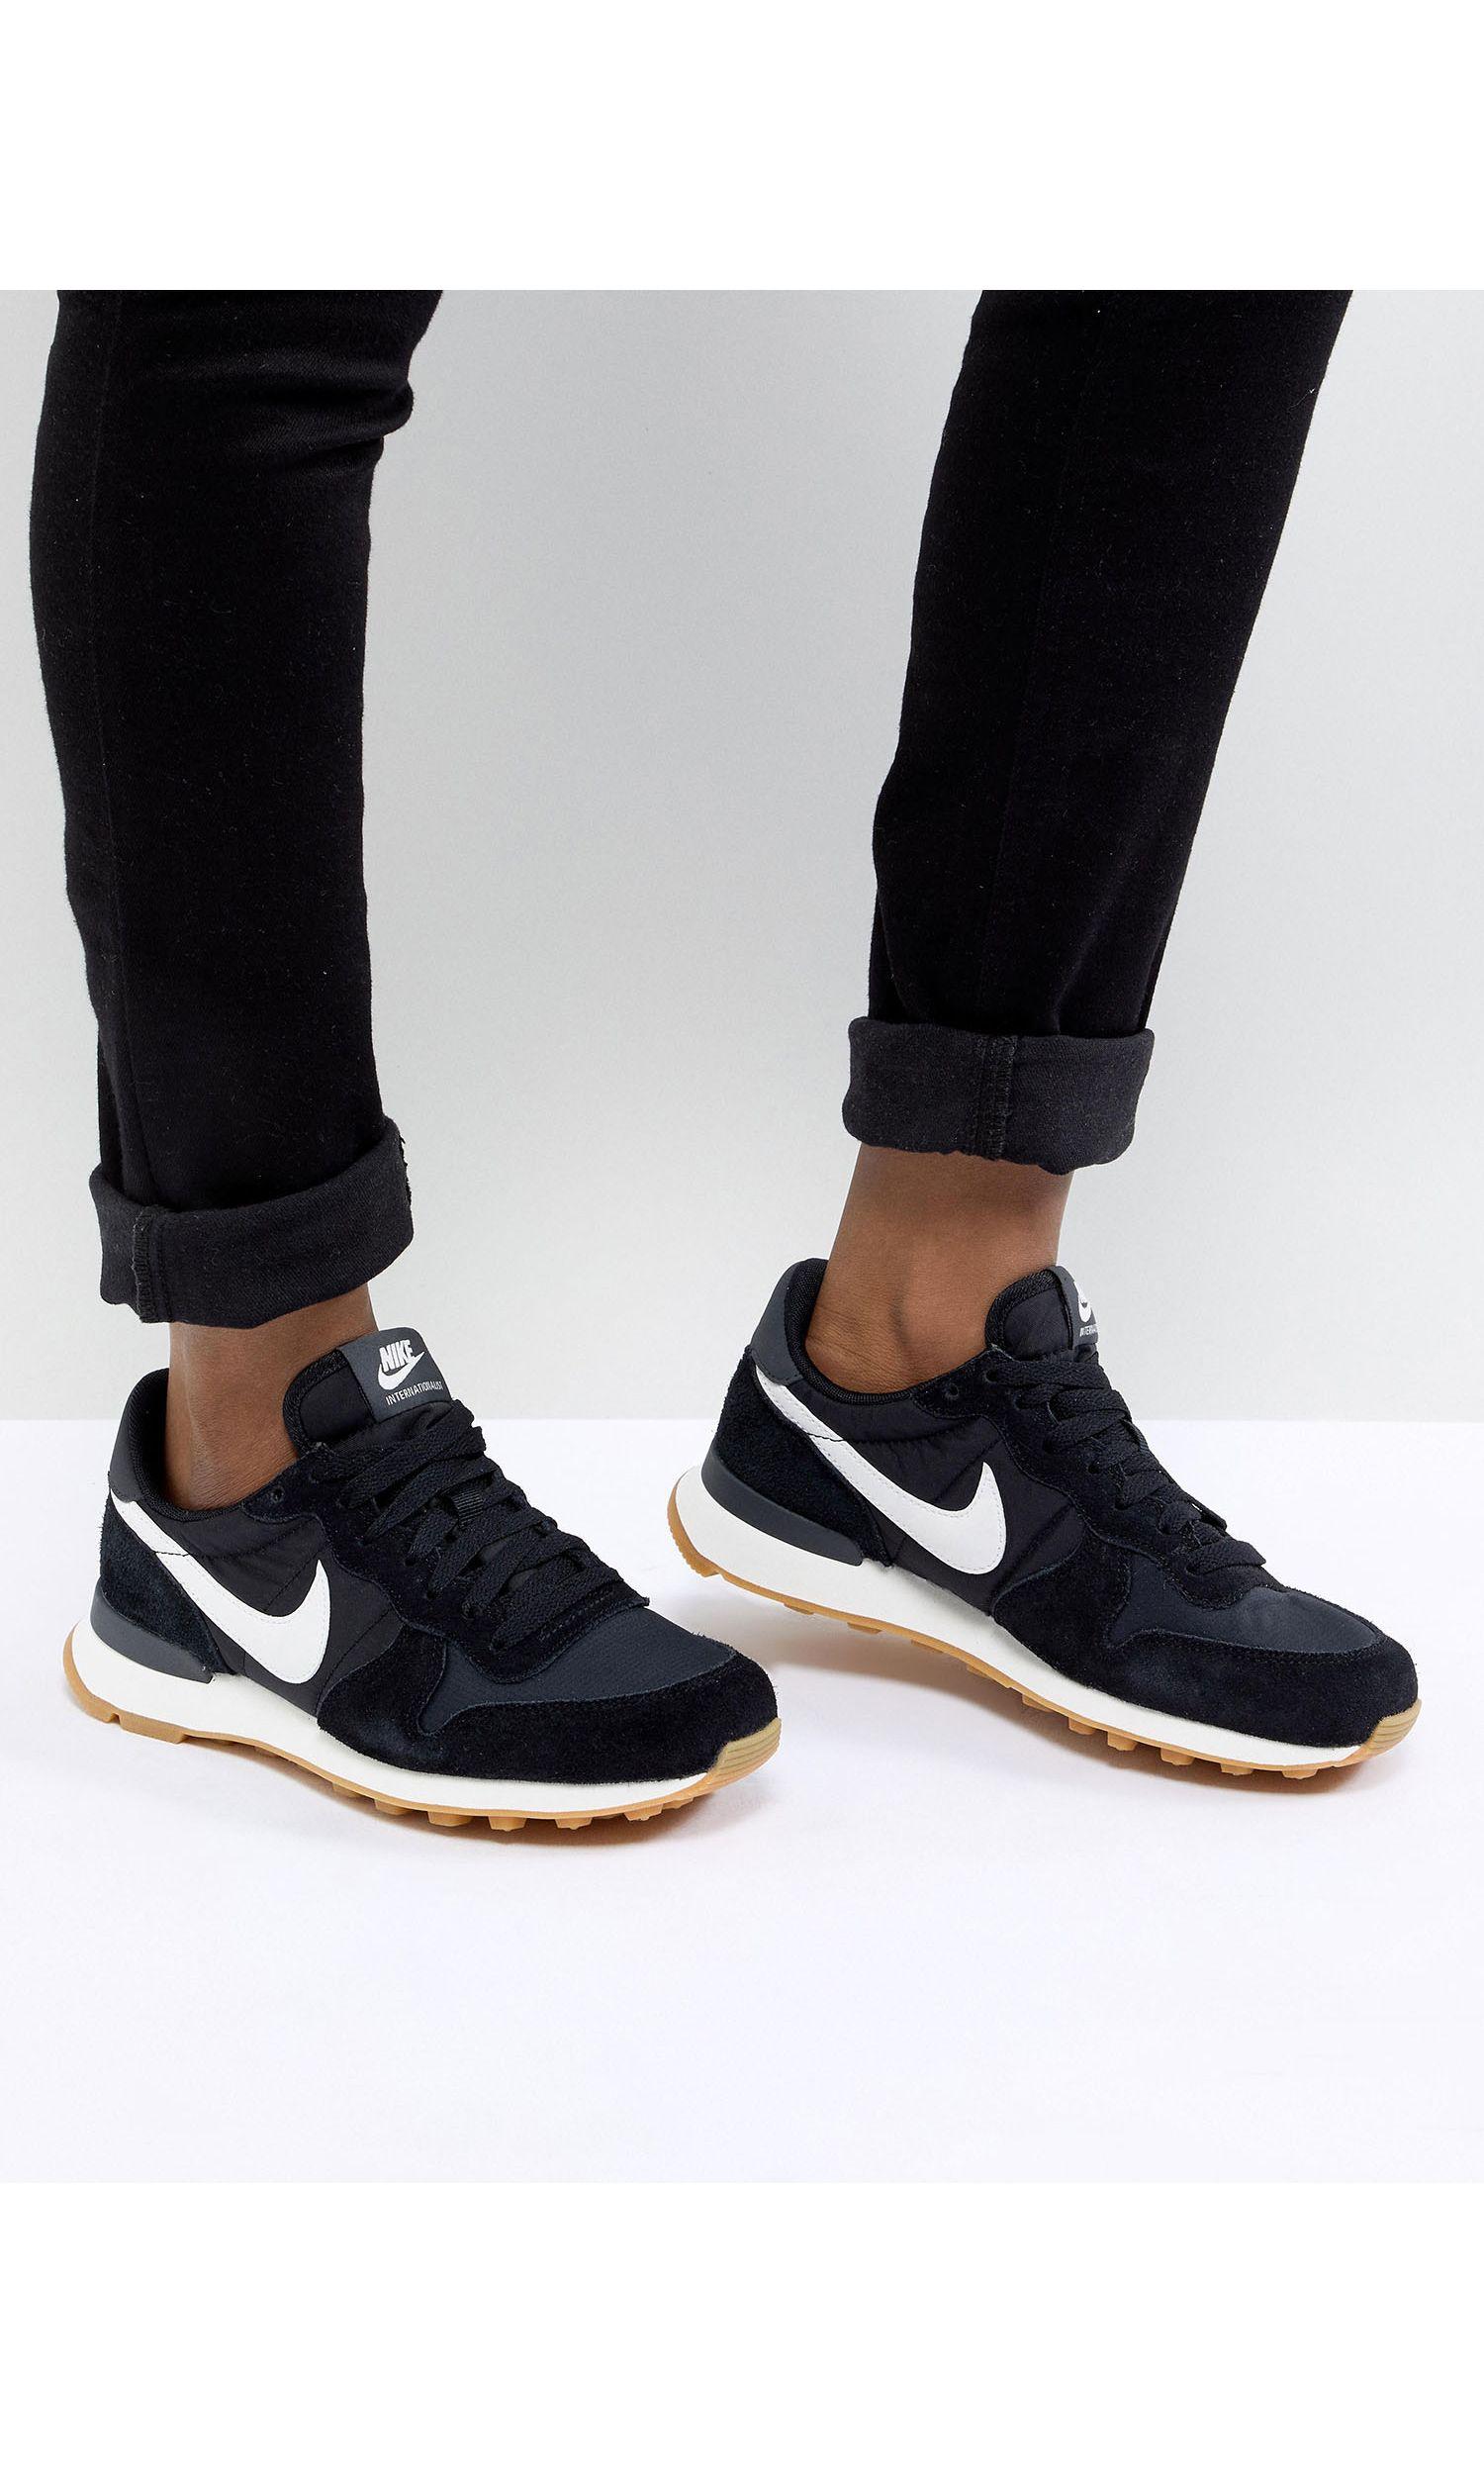 Nike Internationalist Competition Shoes in Black | Lyst